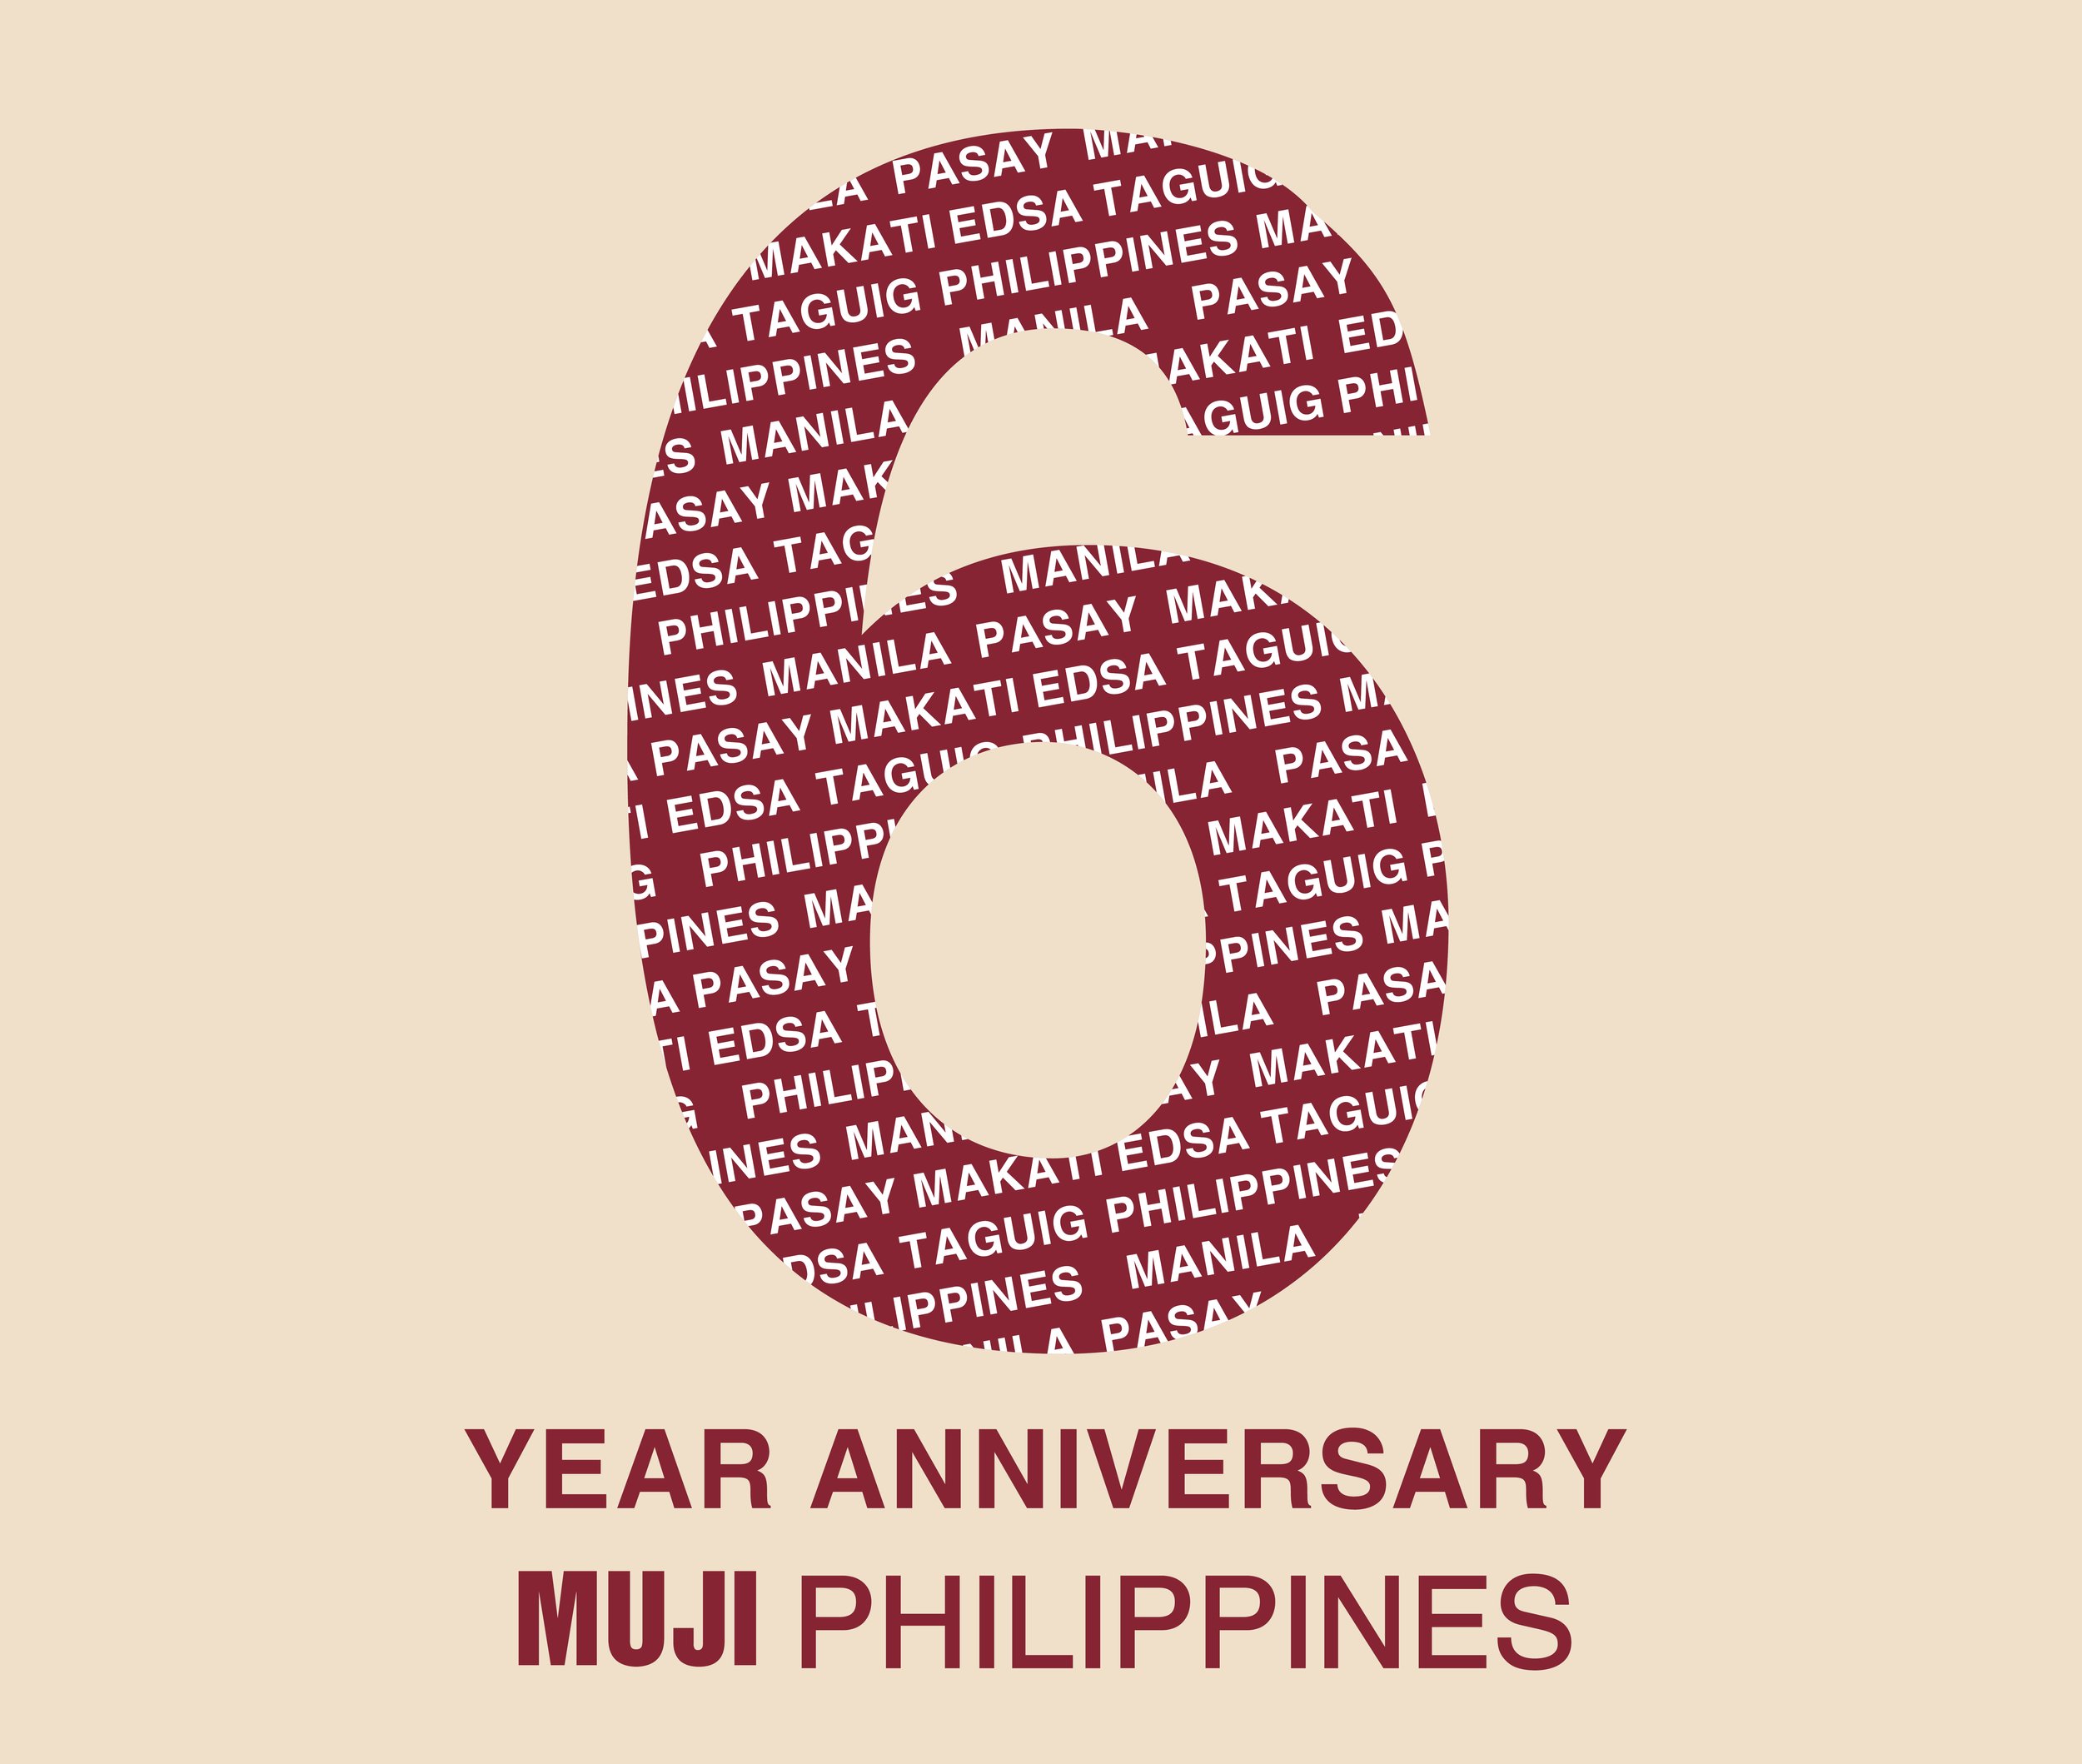 Shop From Muji Japan and Ship to Philippines